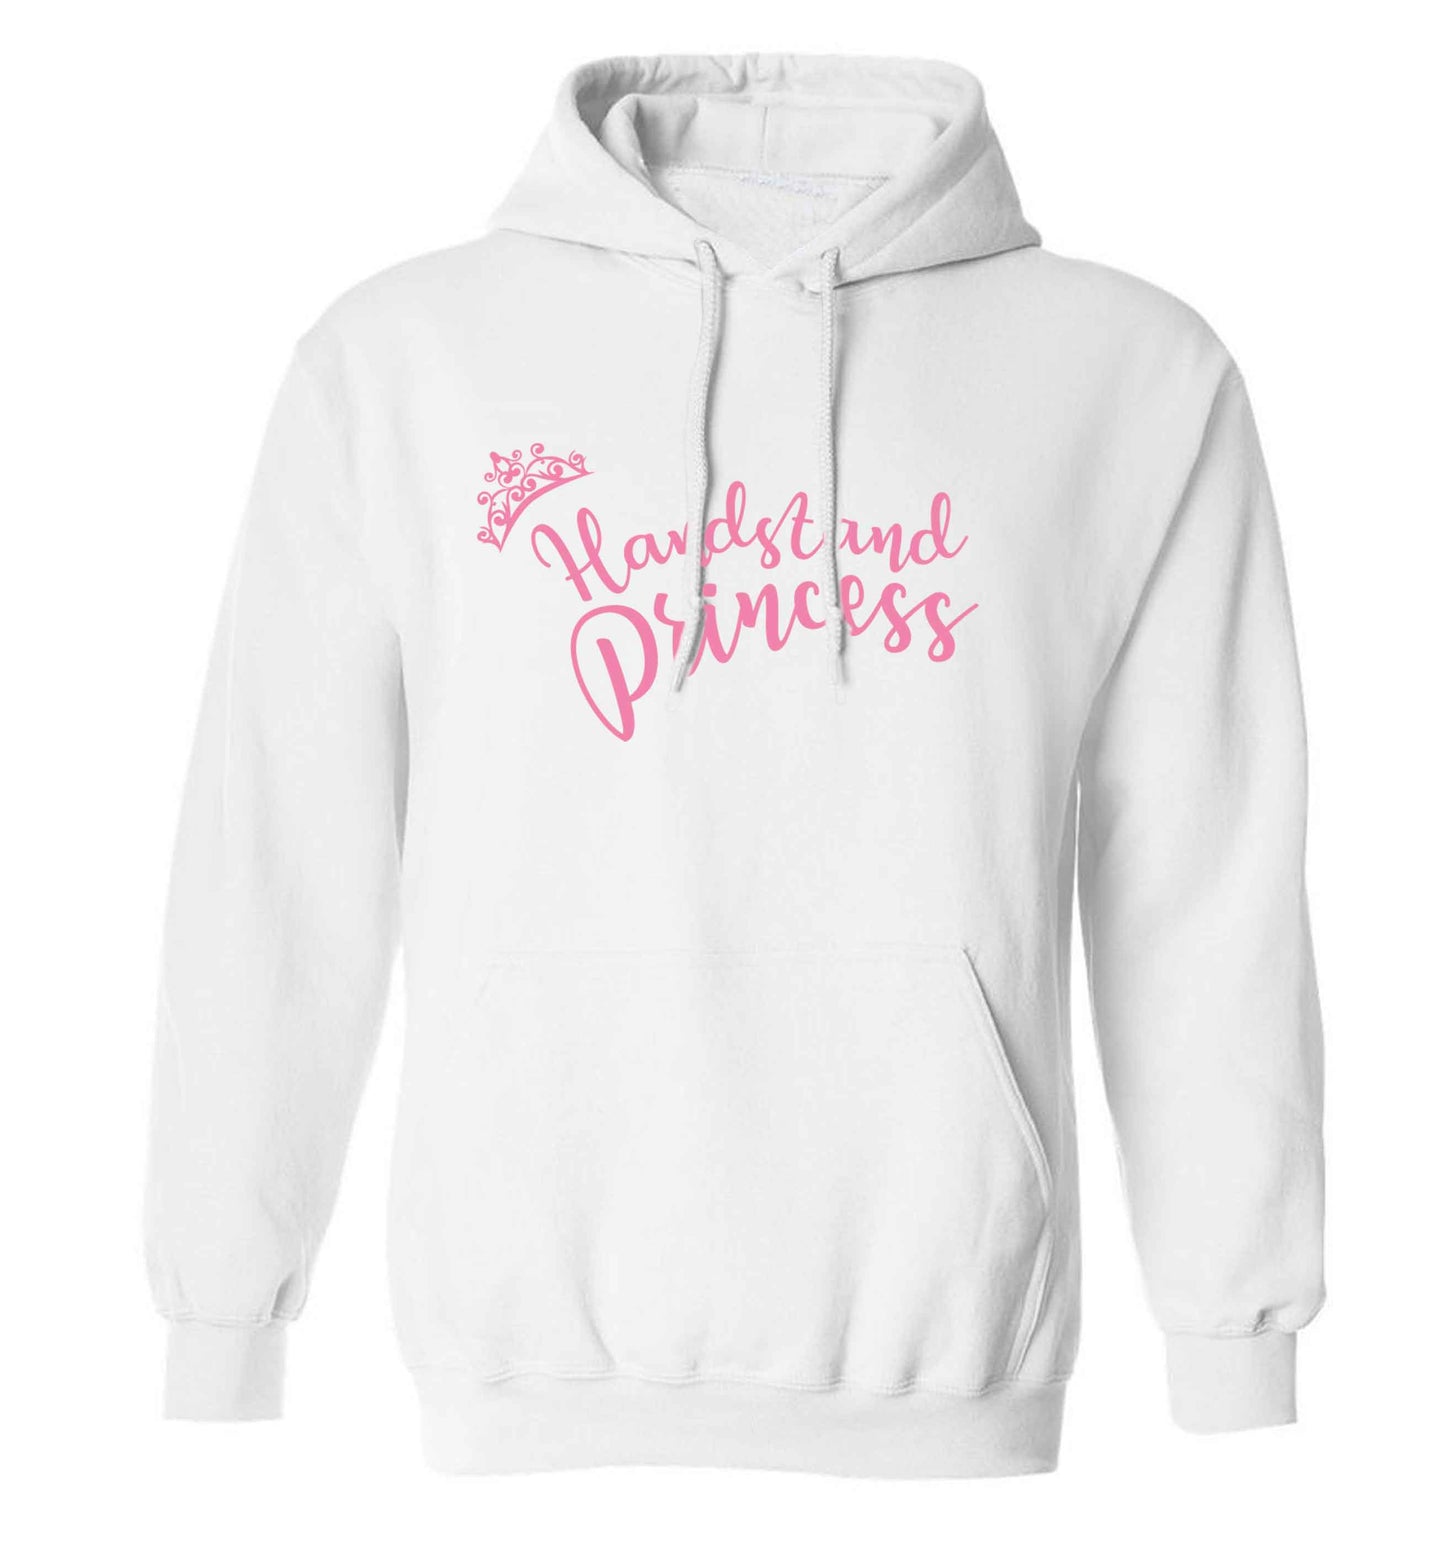 Handstand princess adults unisex white hoodie 2XL